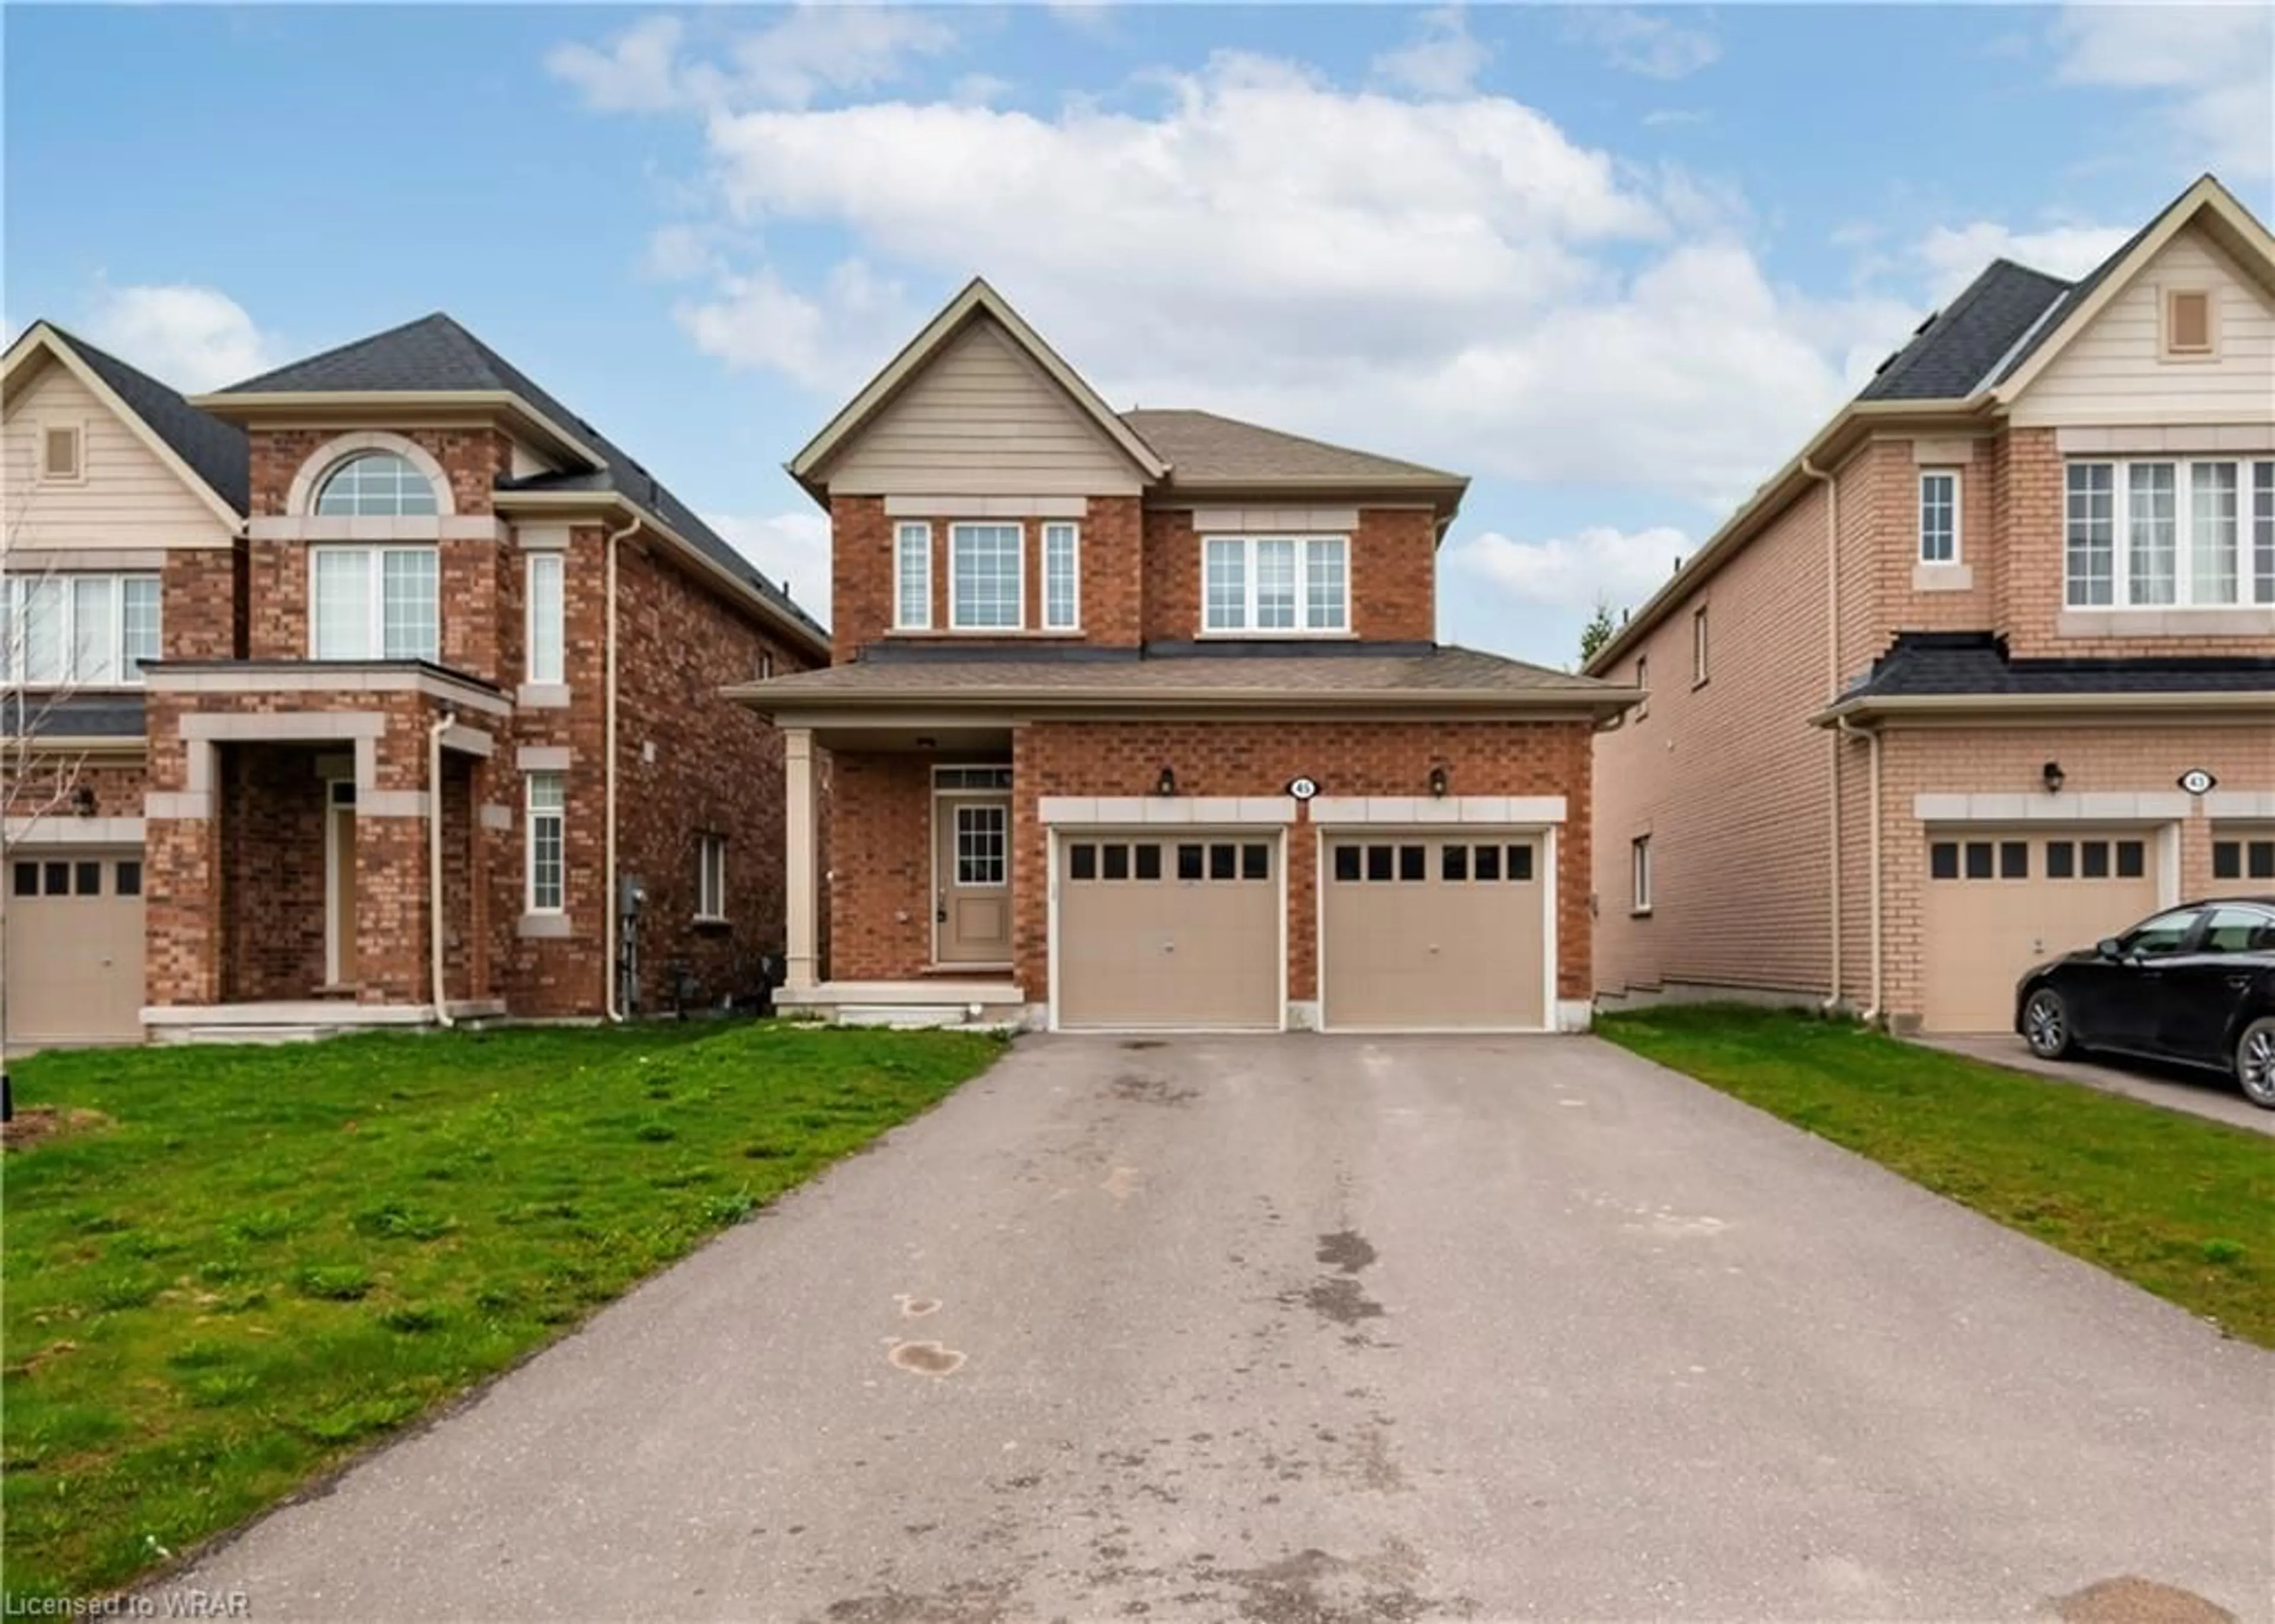 Home with brick exterior material for 45 Rainey Dr, East Luther-Grand Valley Ontario L9W 7R5